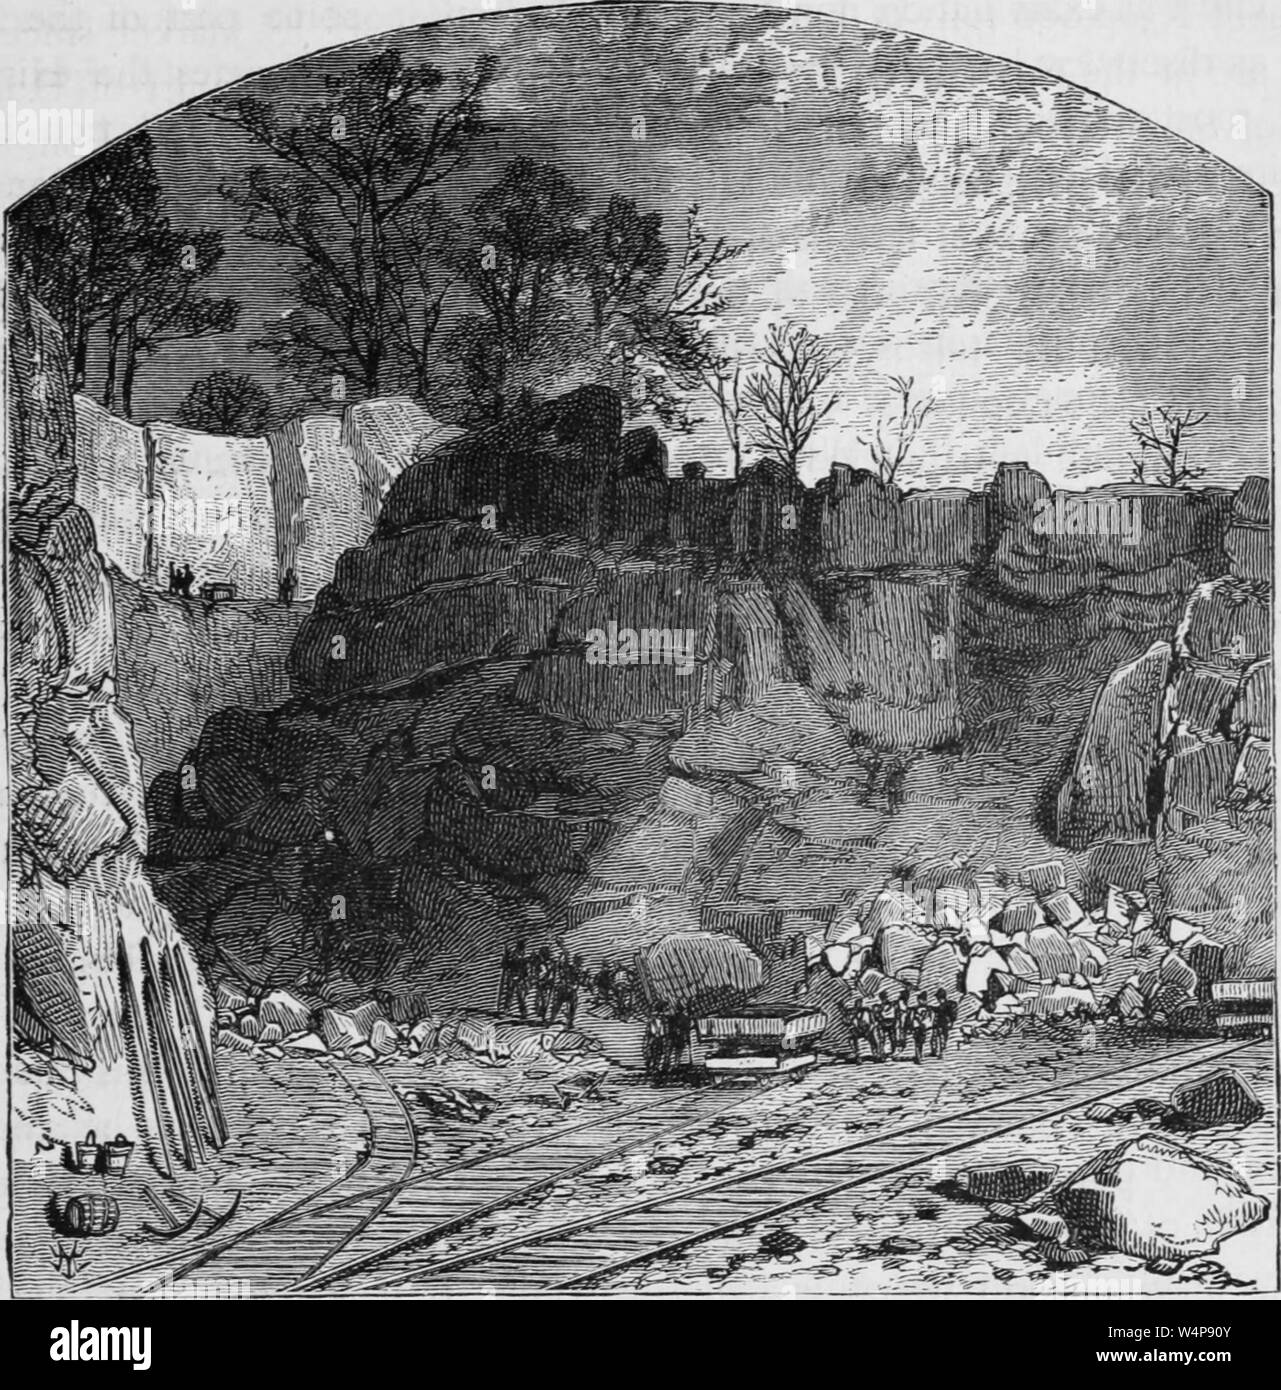 Engraving of the iron mine workers in the cut in Iron Mountains, Lake Superior, from the book 'Industrial history of the United States' by Albert Sidney Bolles, 1878. Courtesy Internet Archive. () Stock Photo